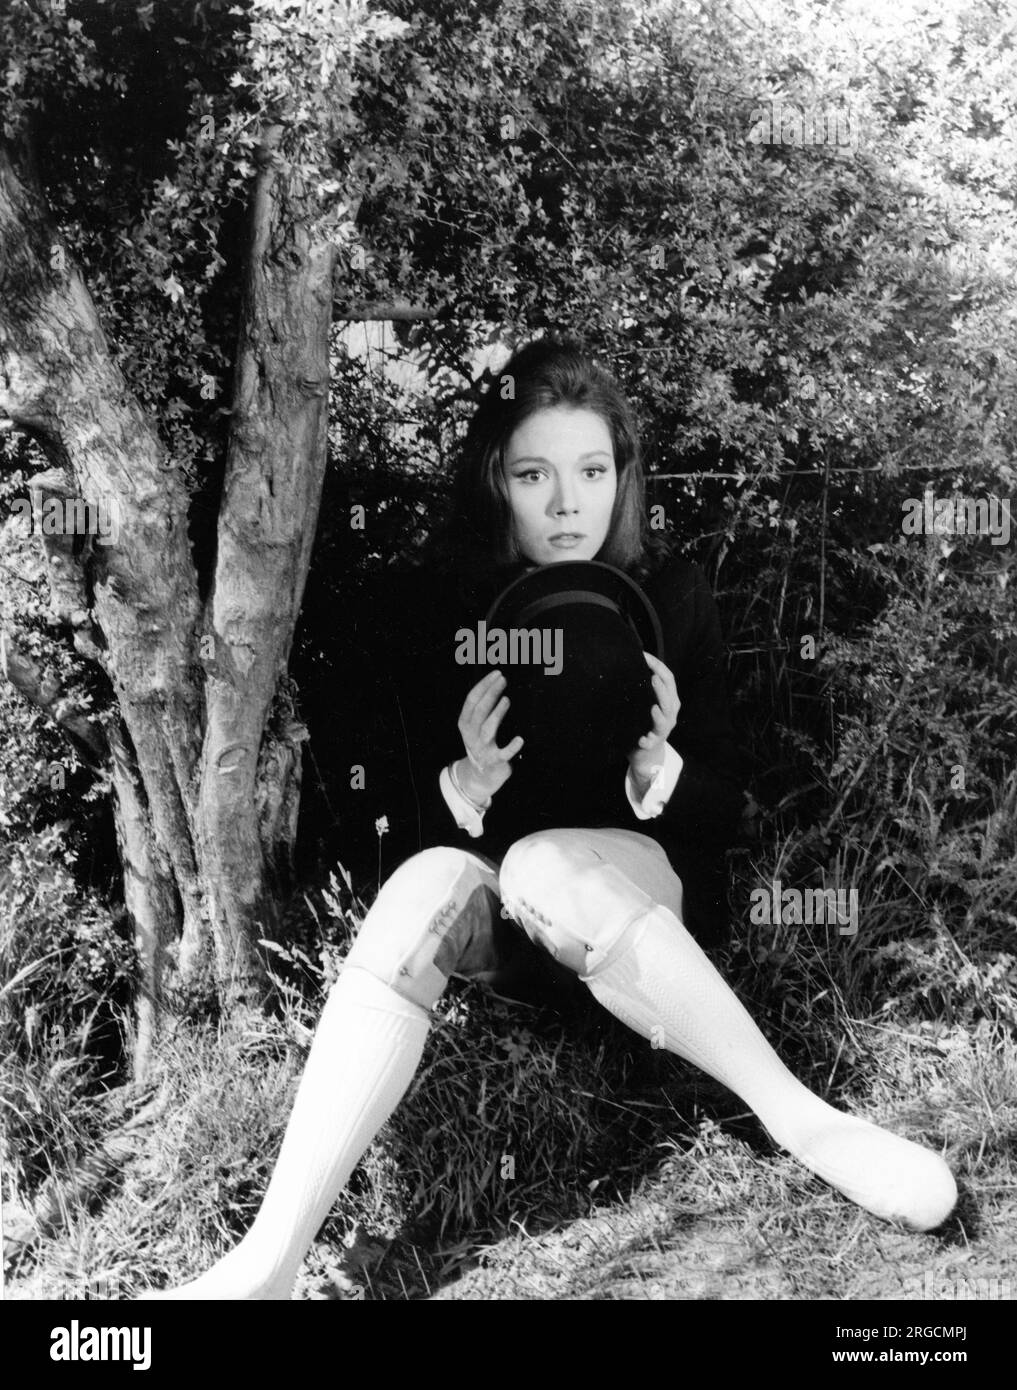 Emma Peel (played by Diana Rigg) in 'The Avengers' TV series. Stock Photo